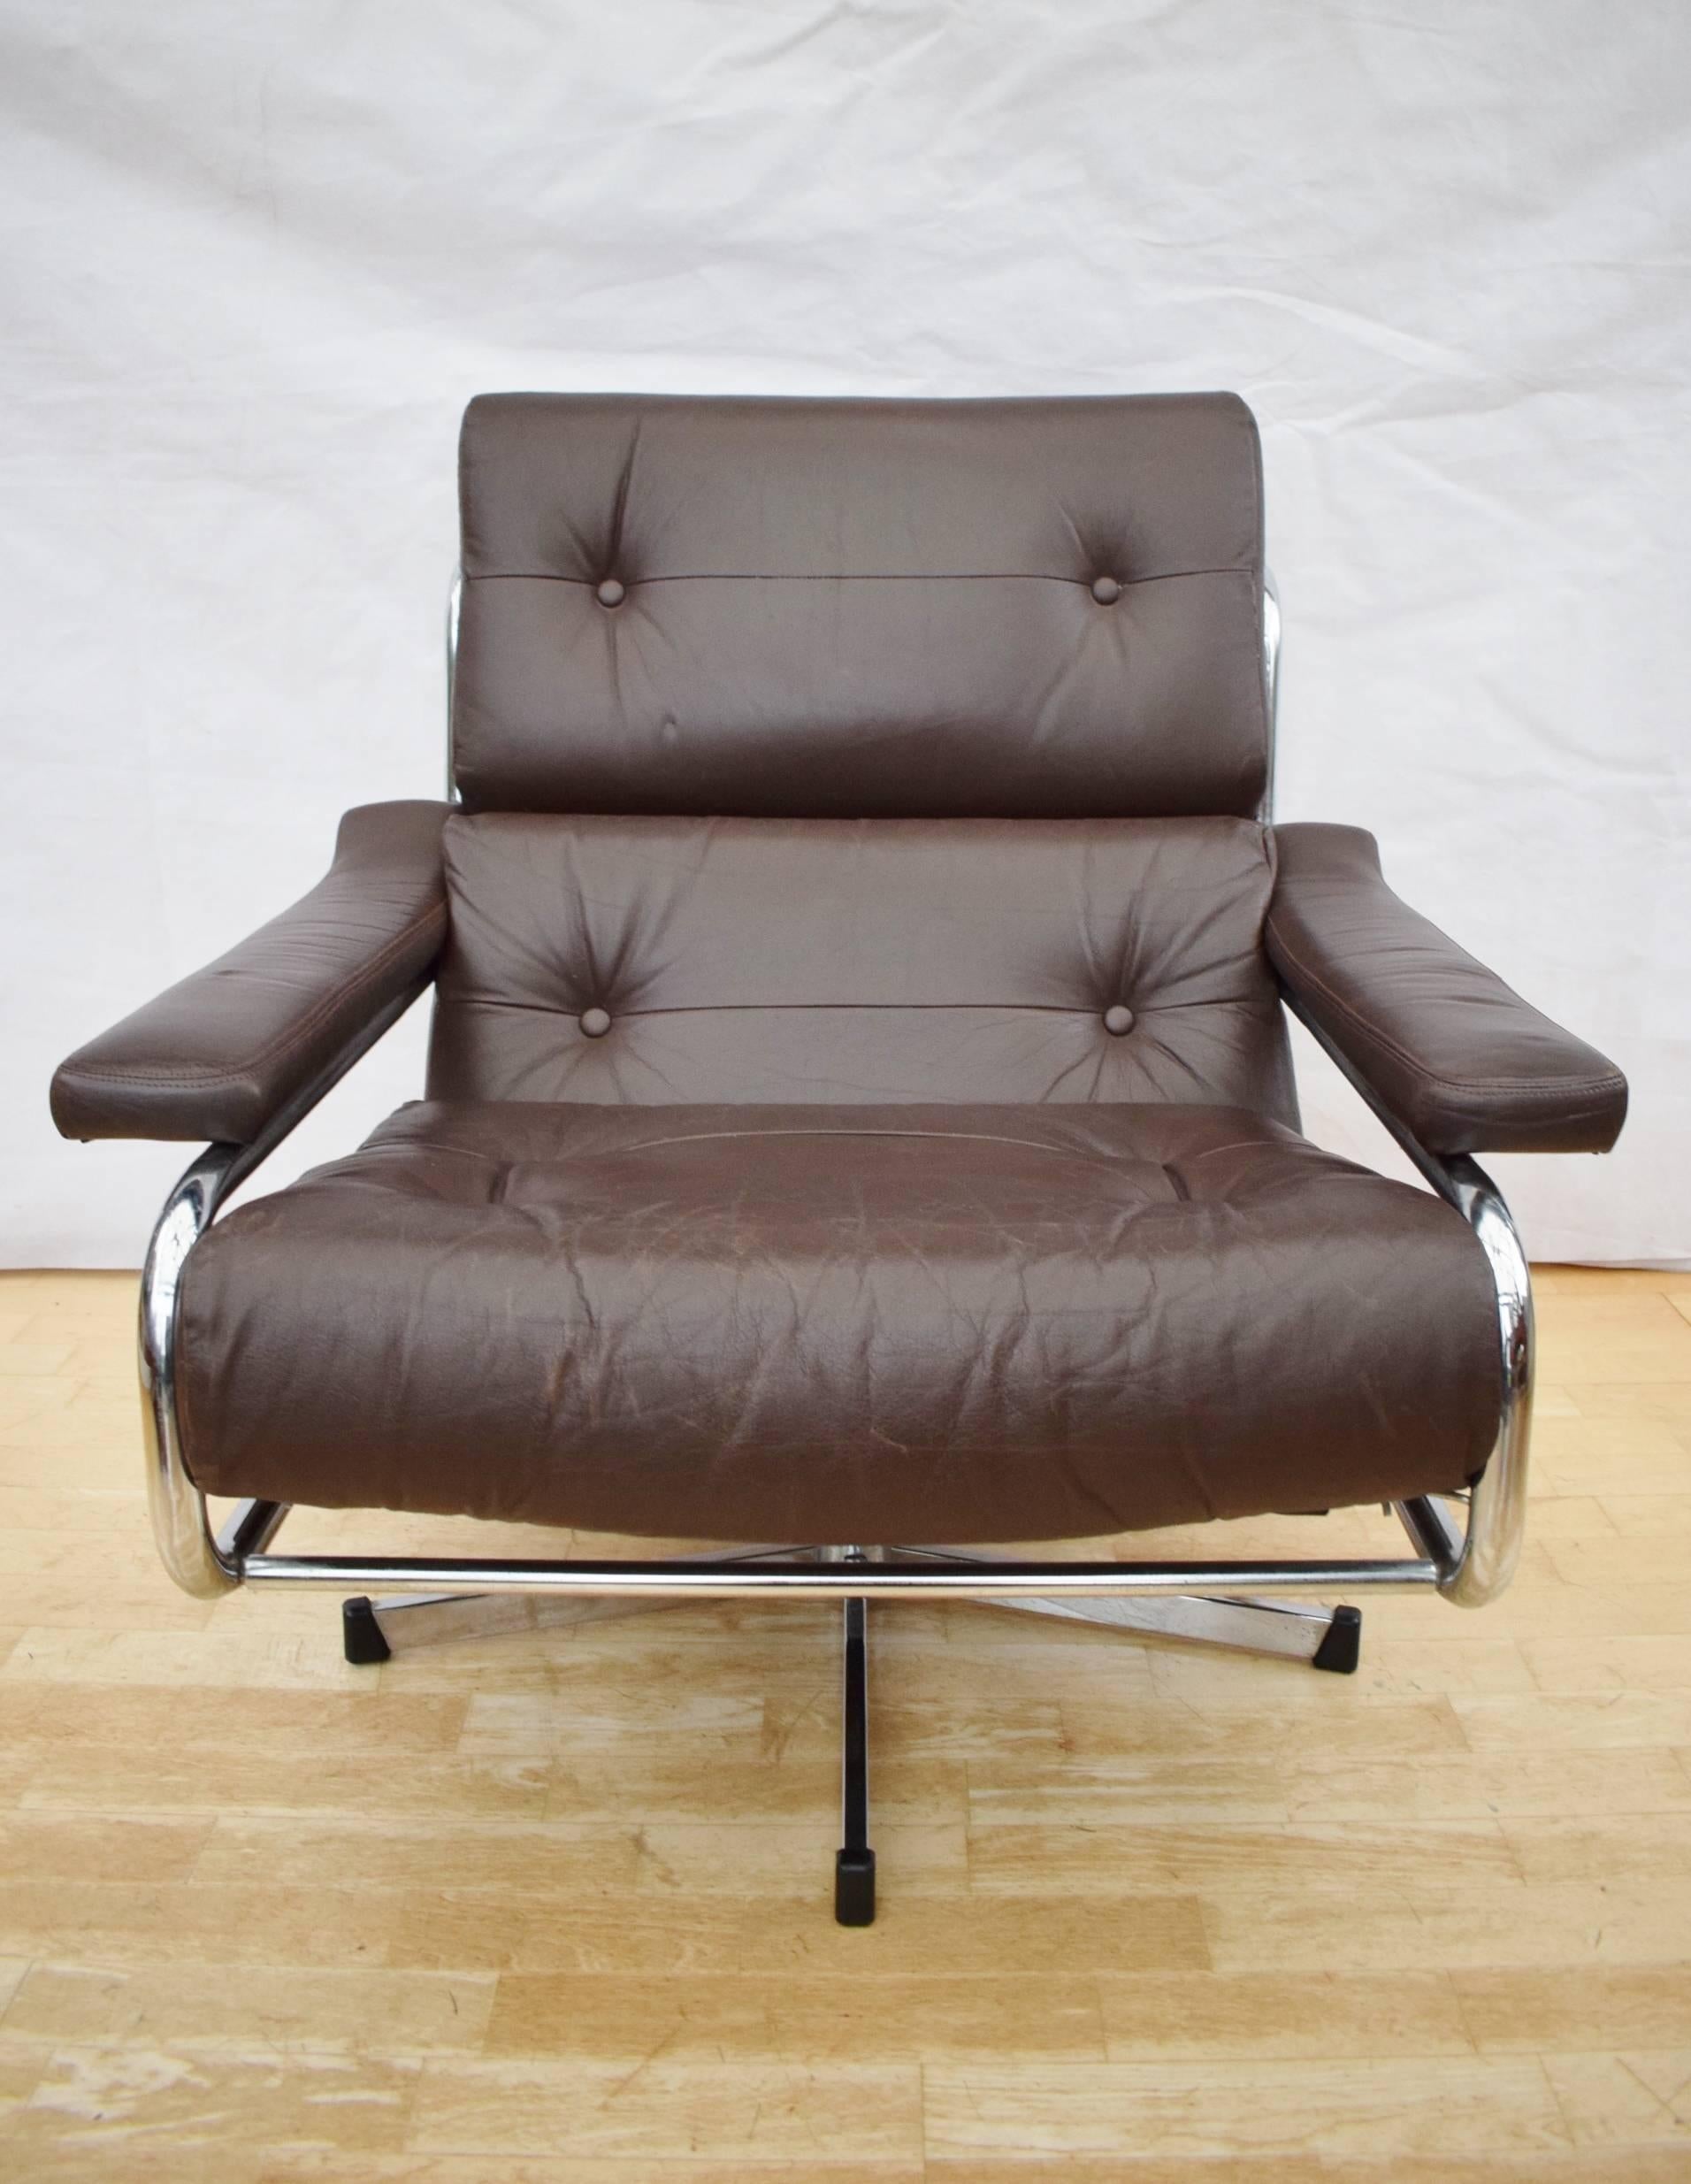 Designer: Tim Bates.

Manufacturer: Pieff of Worcestershire.

Country: England.

Date: 1970s.

Material: Genuine Brown leather upholstery with tubular metal frame.

Maximum Dimensions: Width 88cm, depth 100cm, height 87cm and seat height